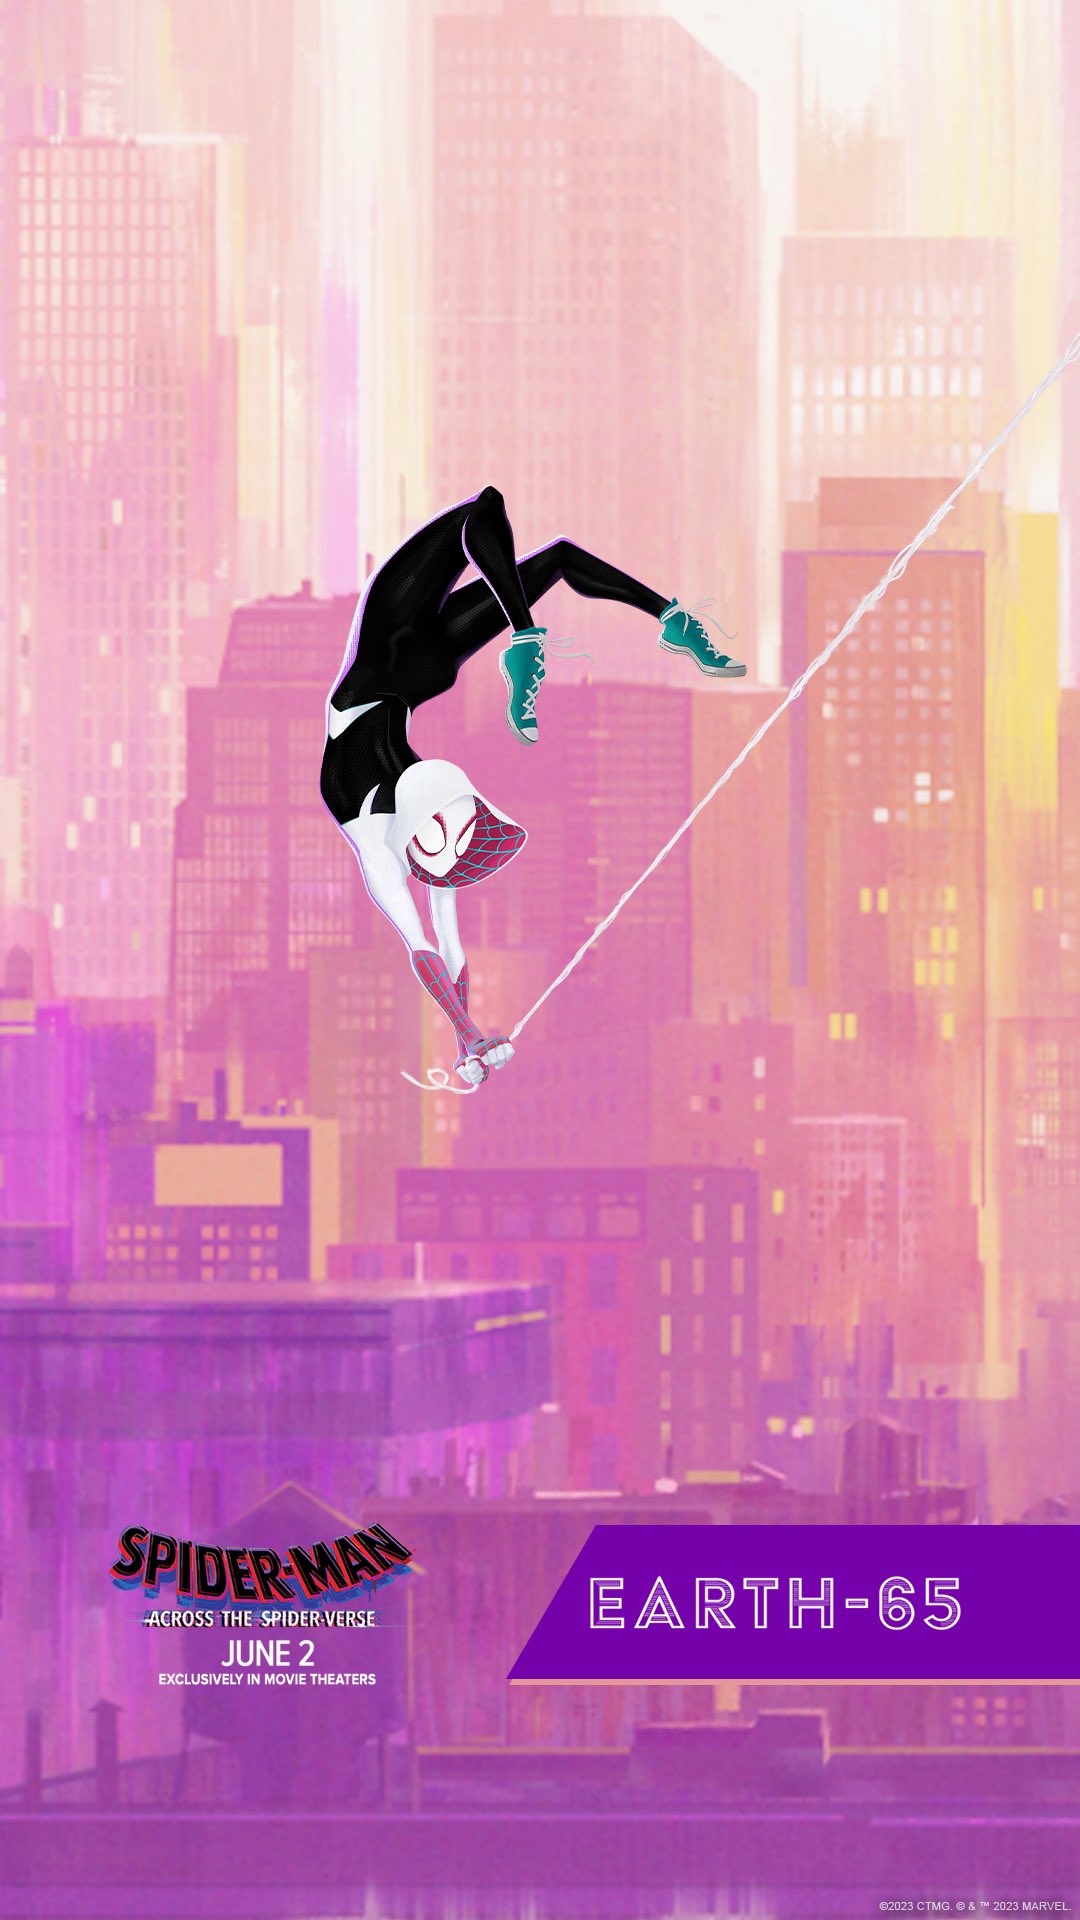 Spider Man News Are Some Across The Spider Verse Wallpaper That Was Sent To People Who Have Opted In To The Spider Society Promotion